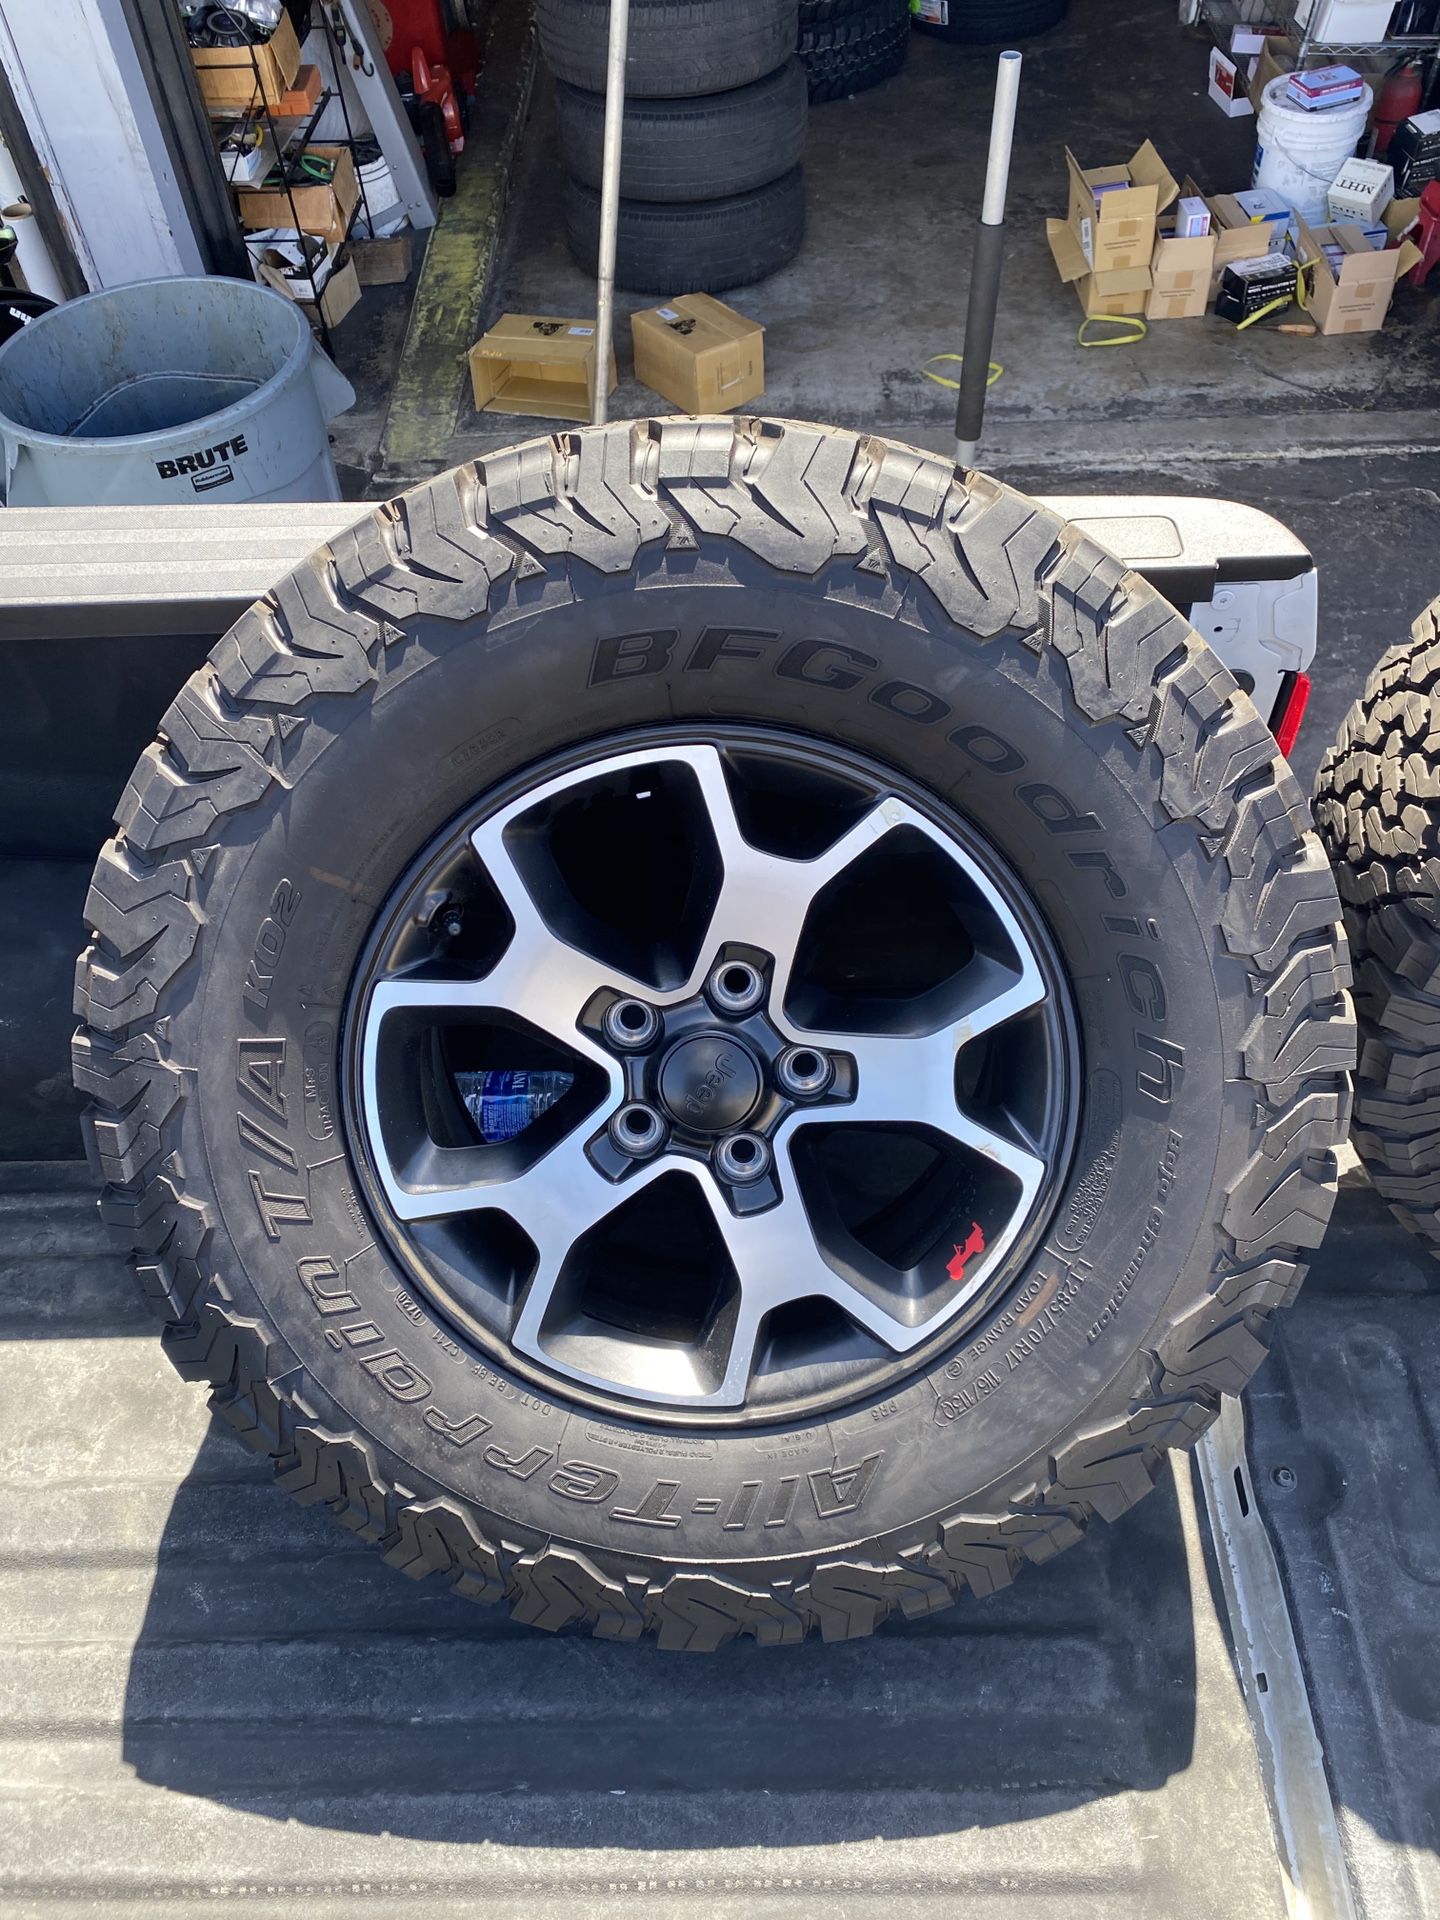 2020 Jeep Wrangler Rubicon wheels and tires